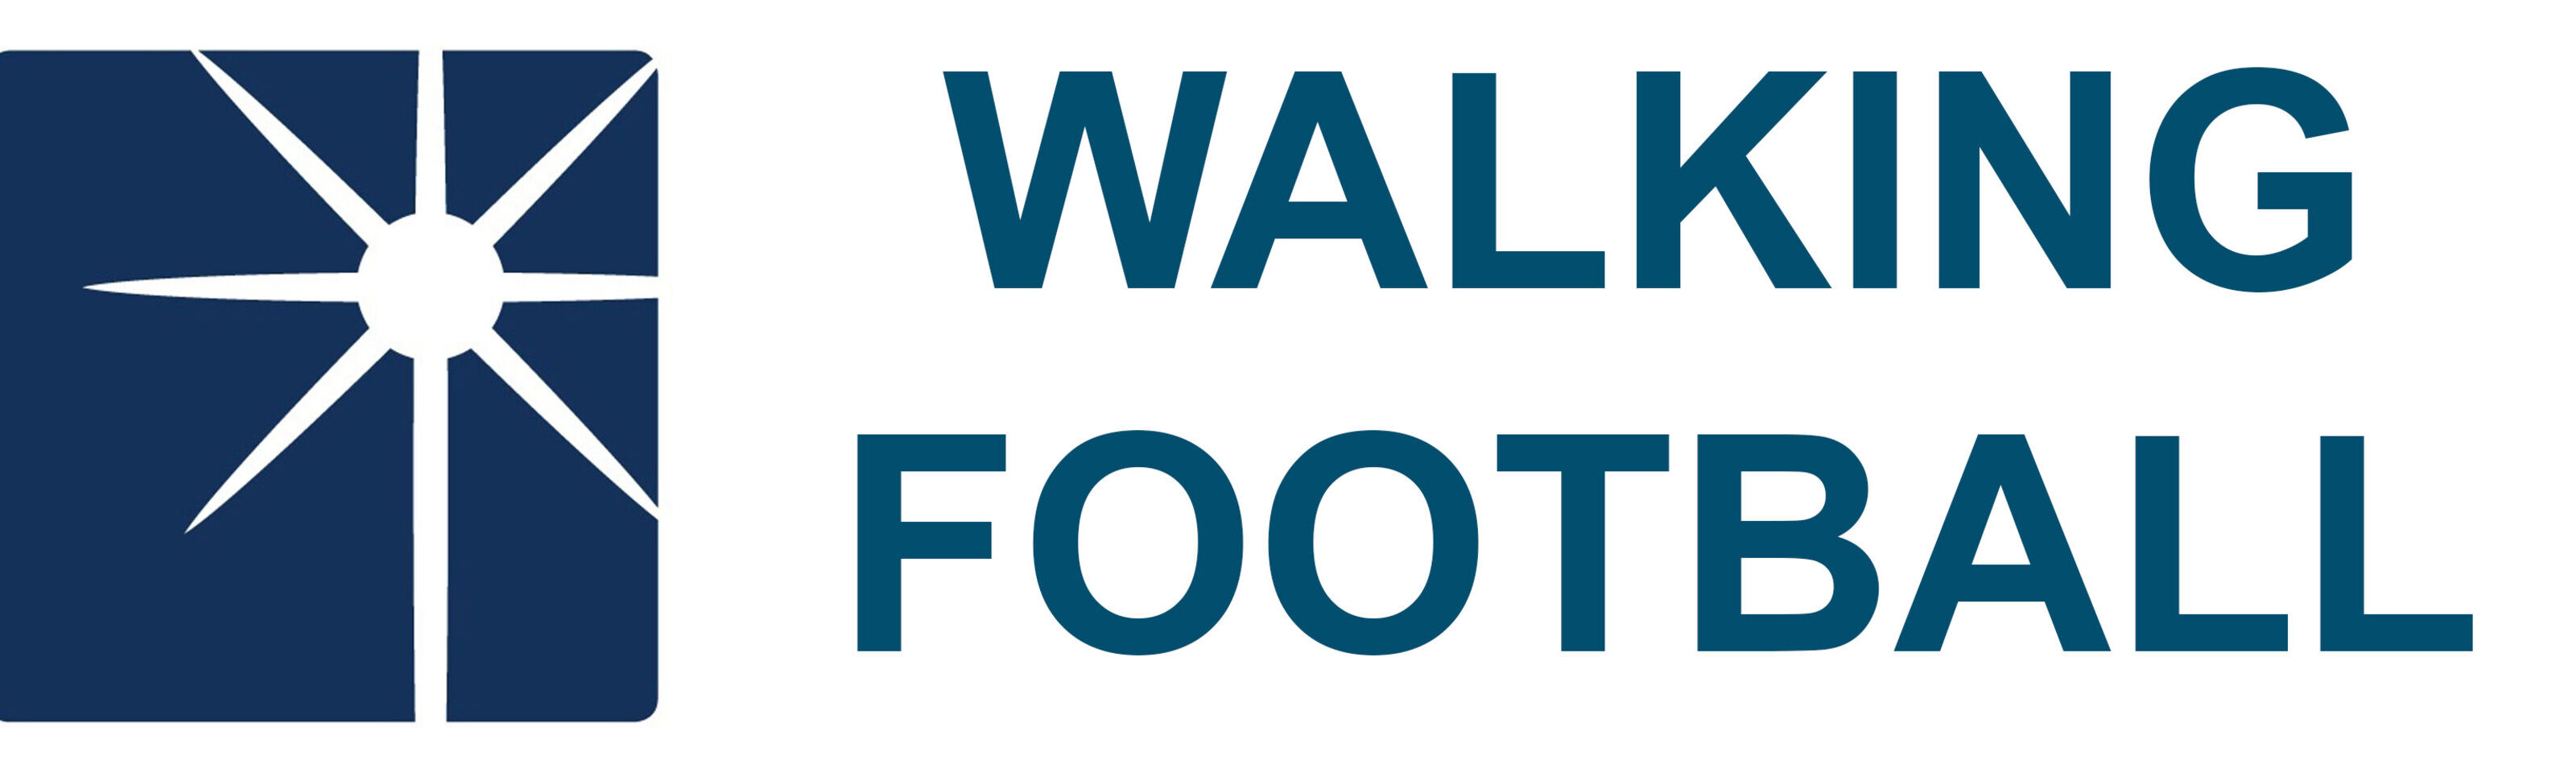 September Festival Walking Football -HASSRA North West Expression of Interest